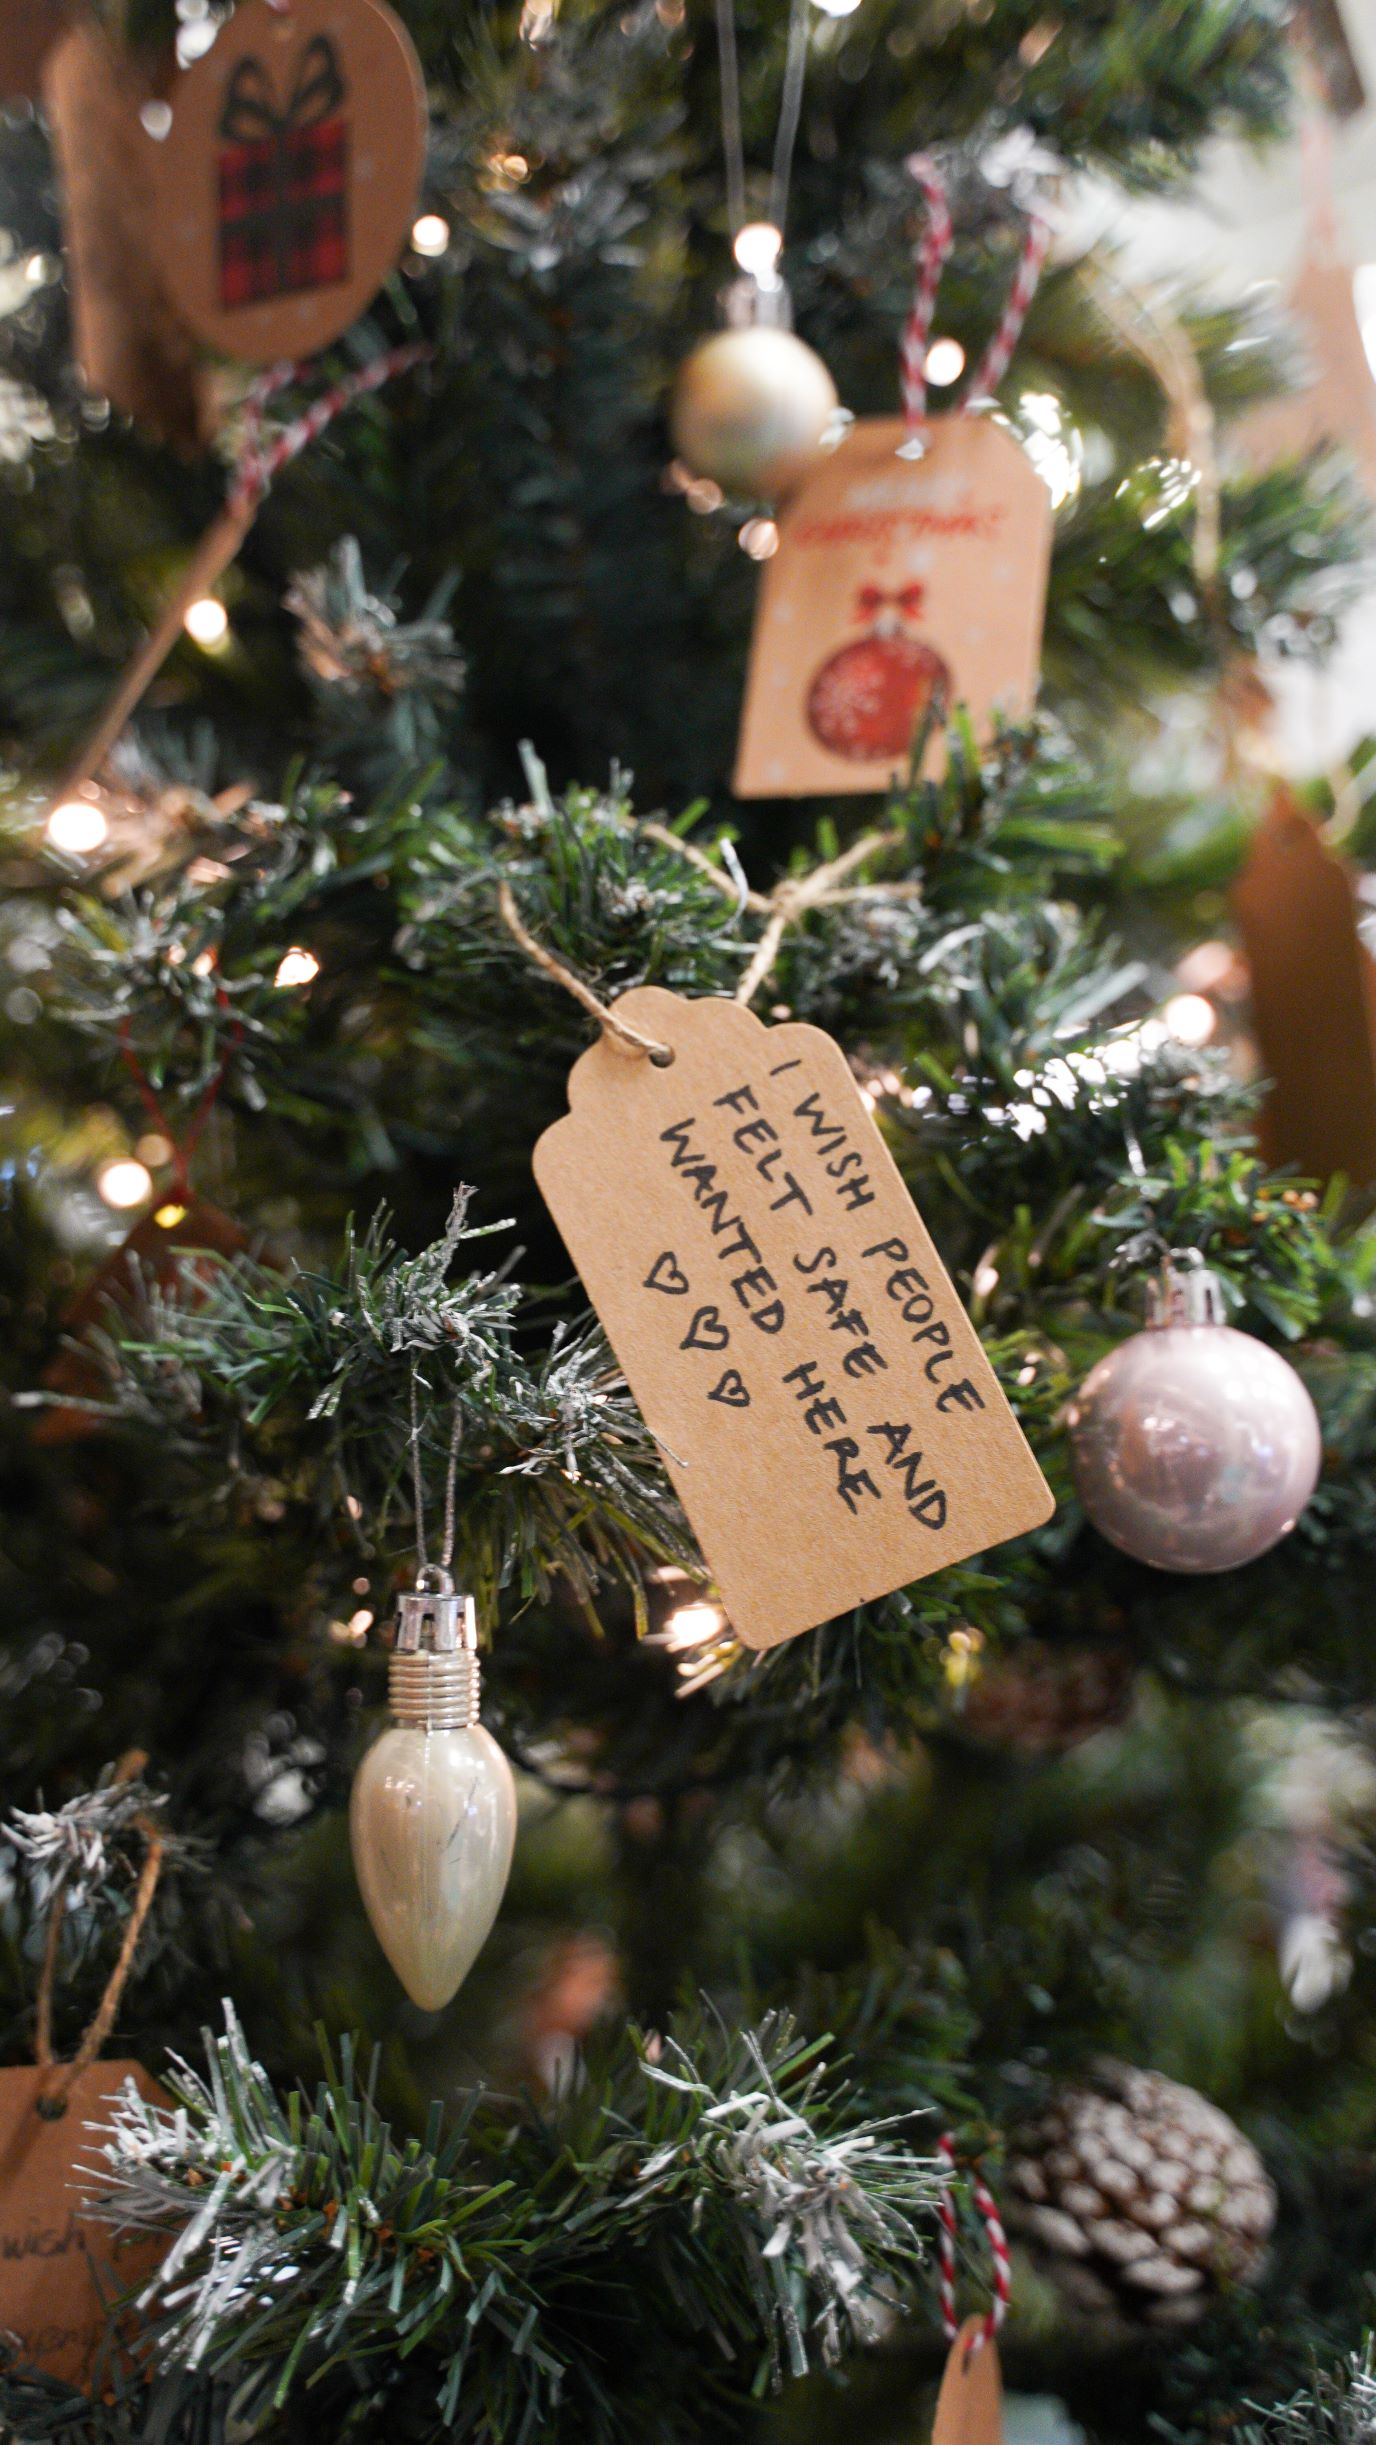 close up of Christmas tree with wish tag reading 'I wish all students felt safe and wanted here'